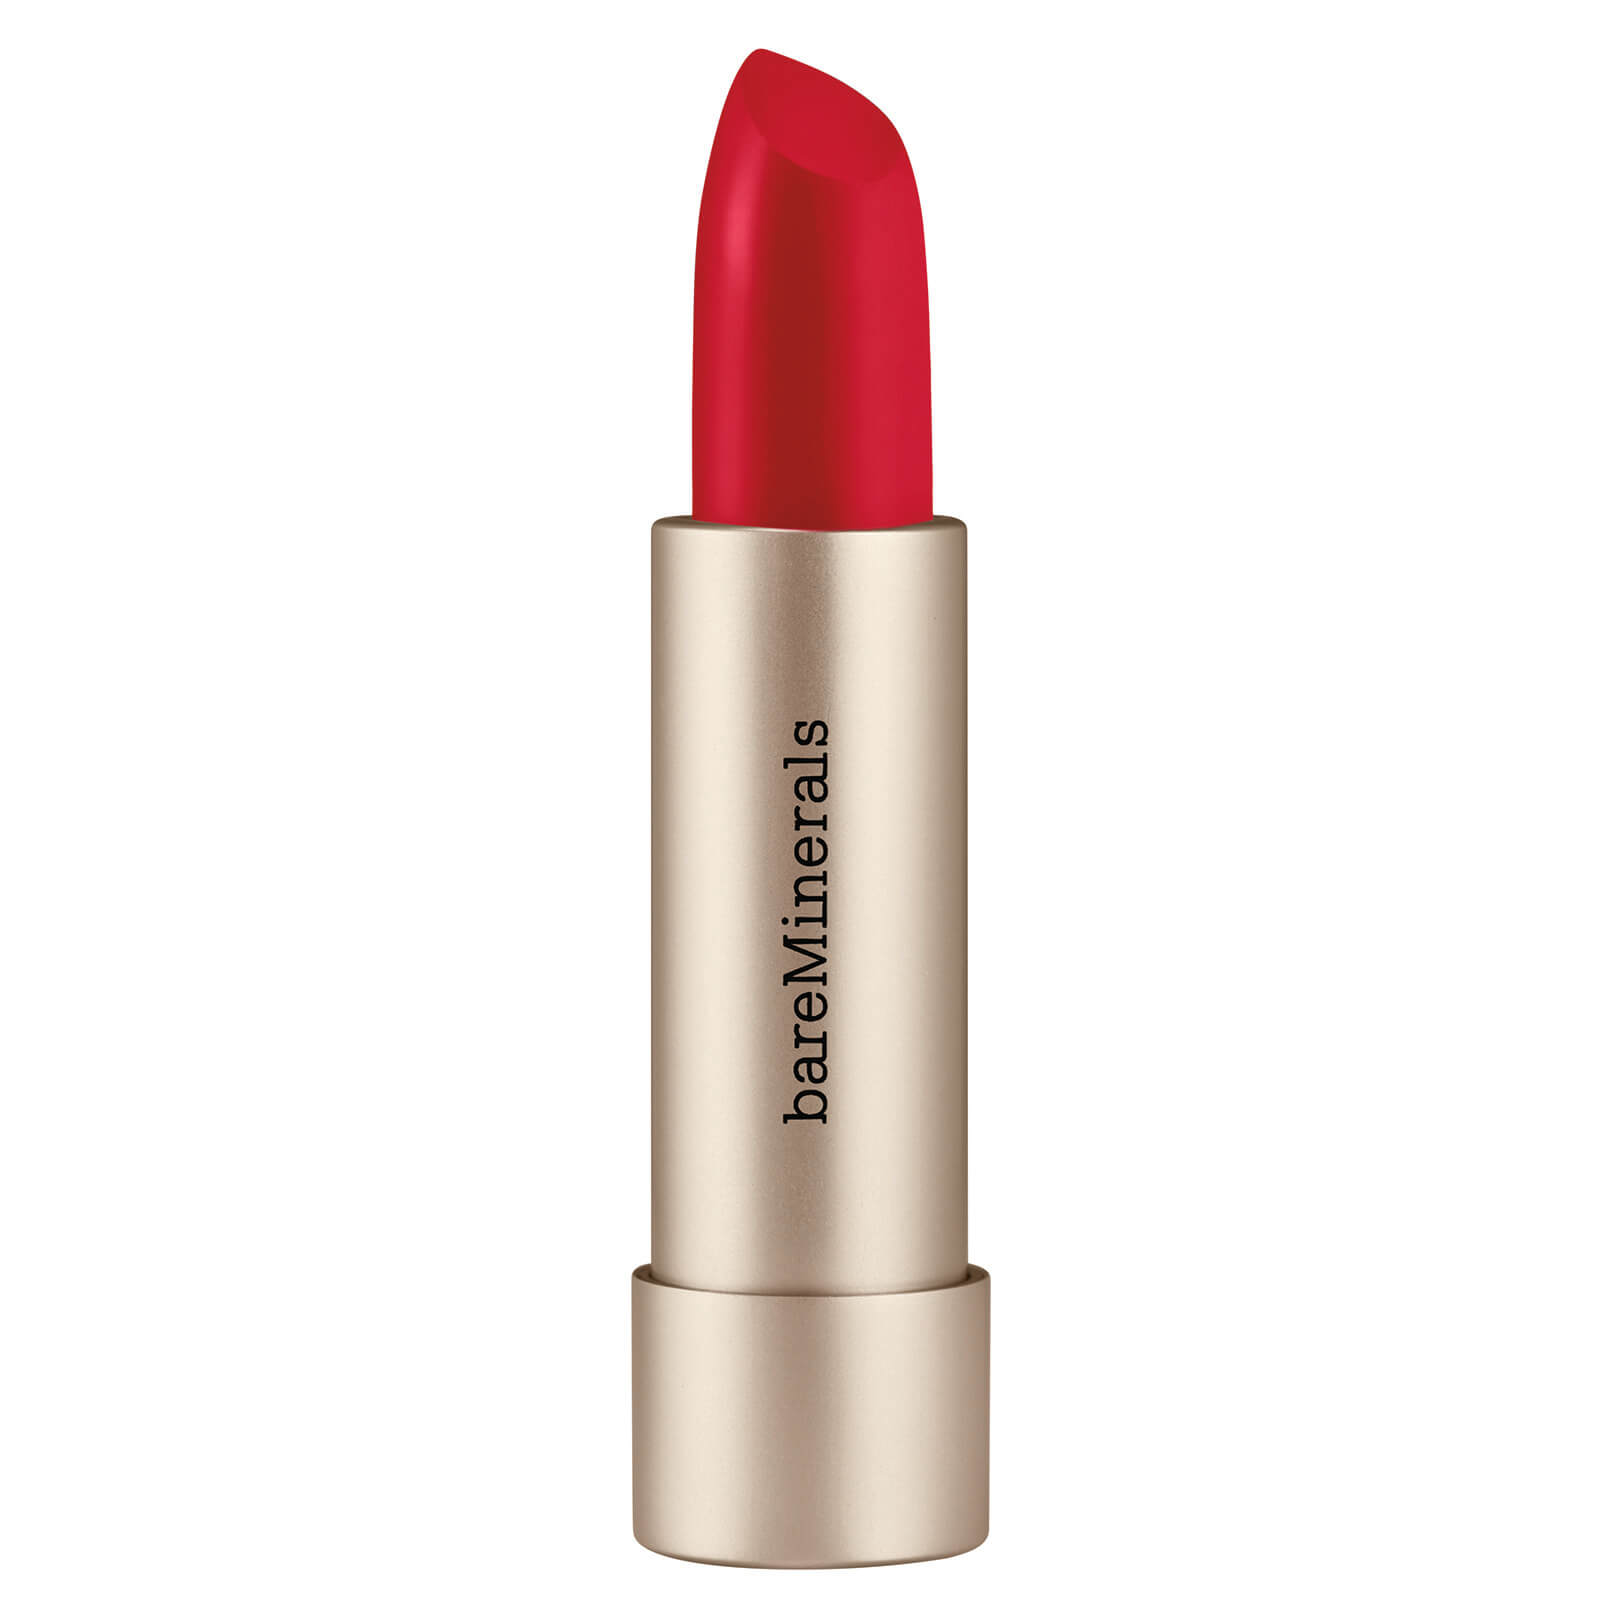 Image of bareMinerals Mineralist Hydra Smoothing Lipstick 3.6g (Various Shades) - Courage